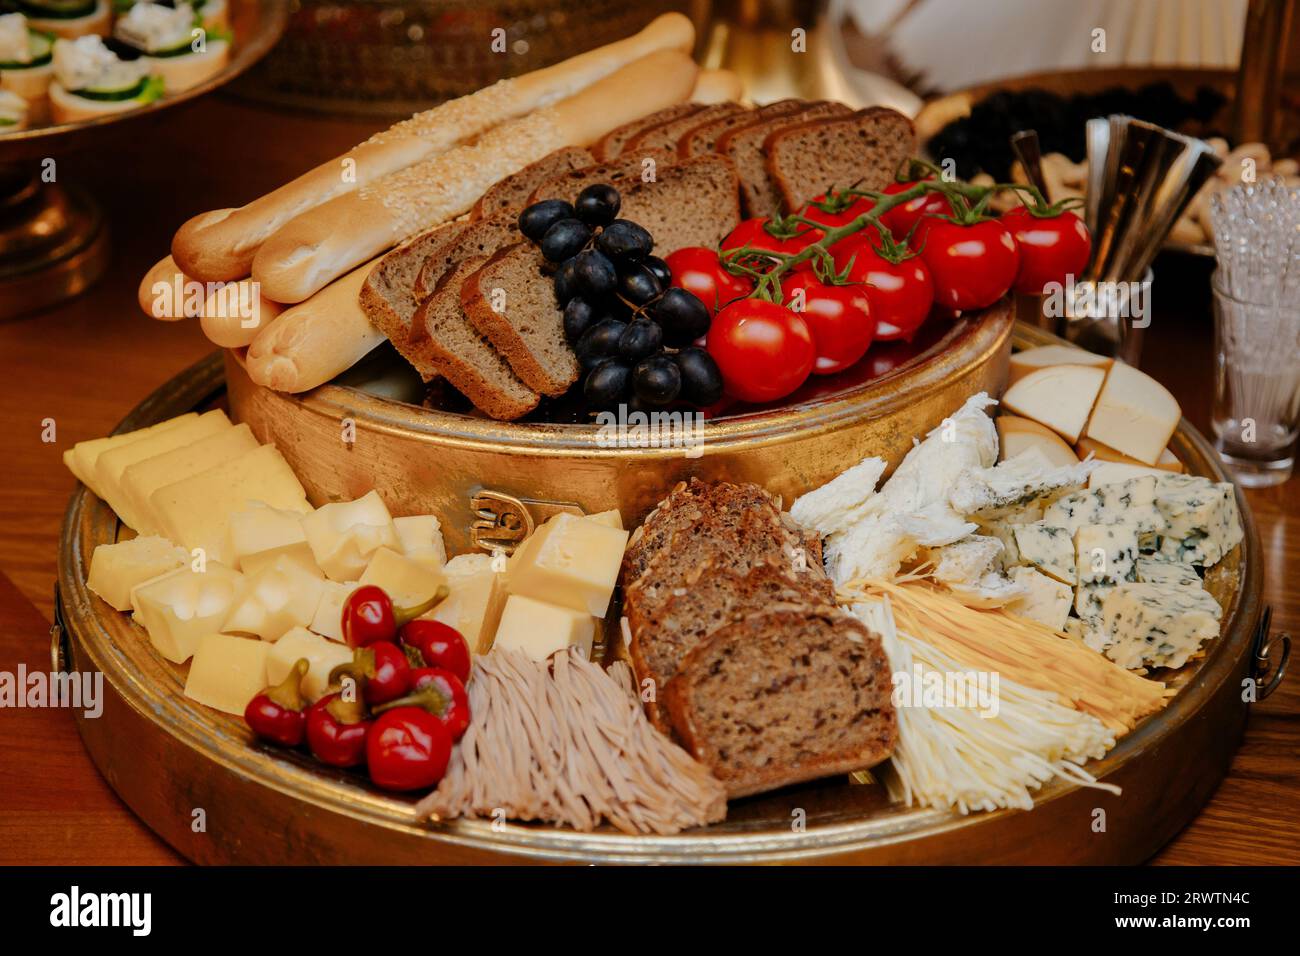 An artisanal platter featuring an array of cured meats, artisan breads, and a selection of cheeses. Stock Photo